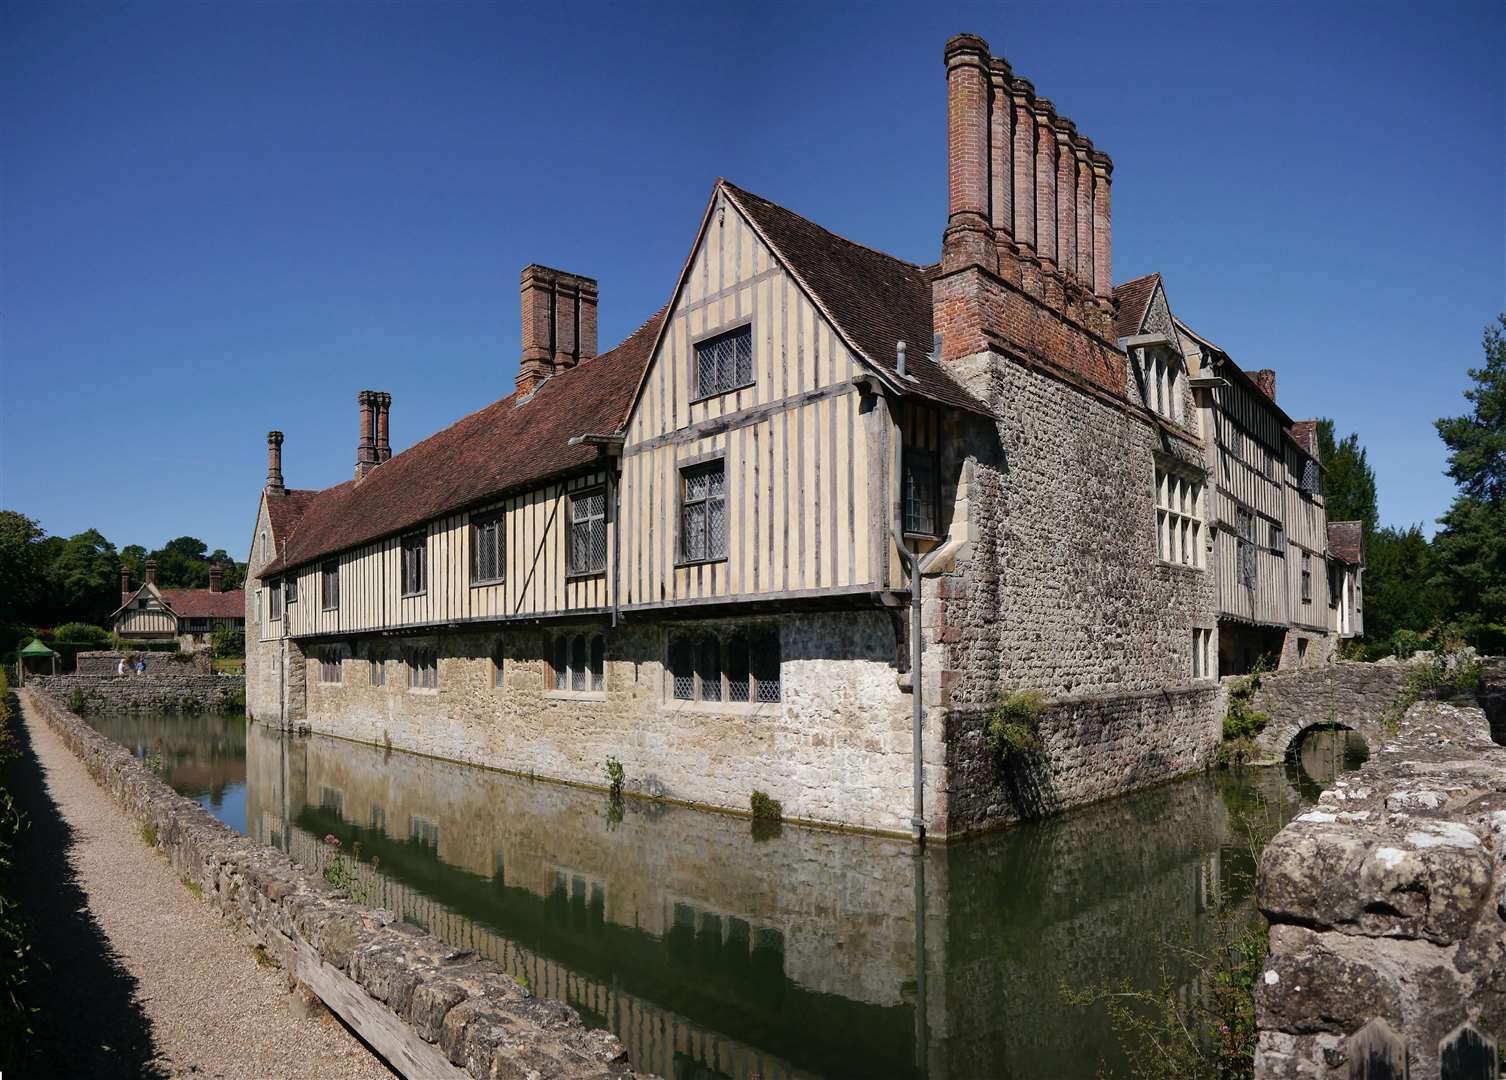 The wood is part of the Ightham Mote estate